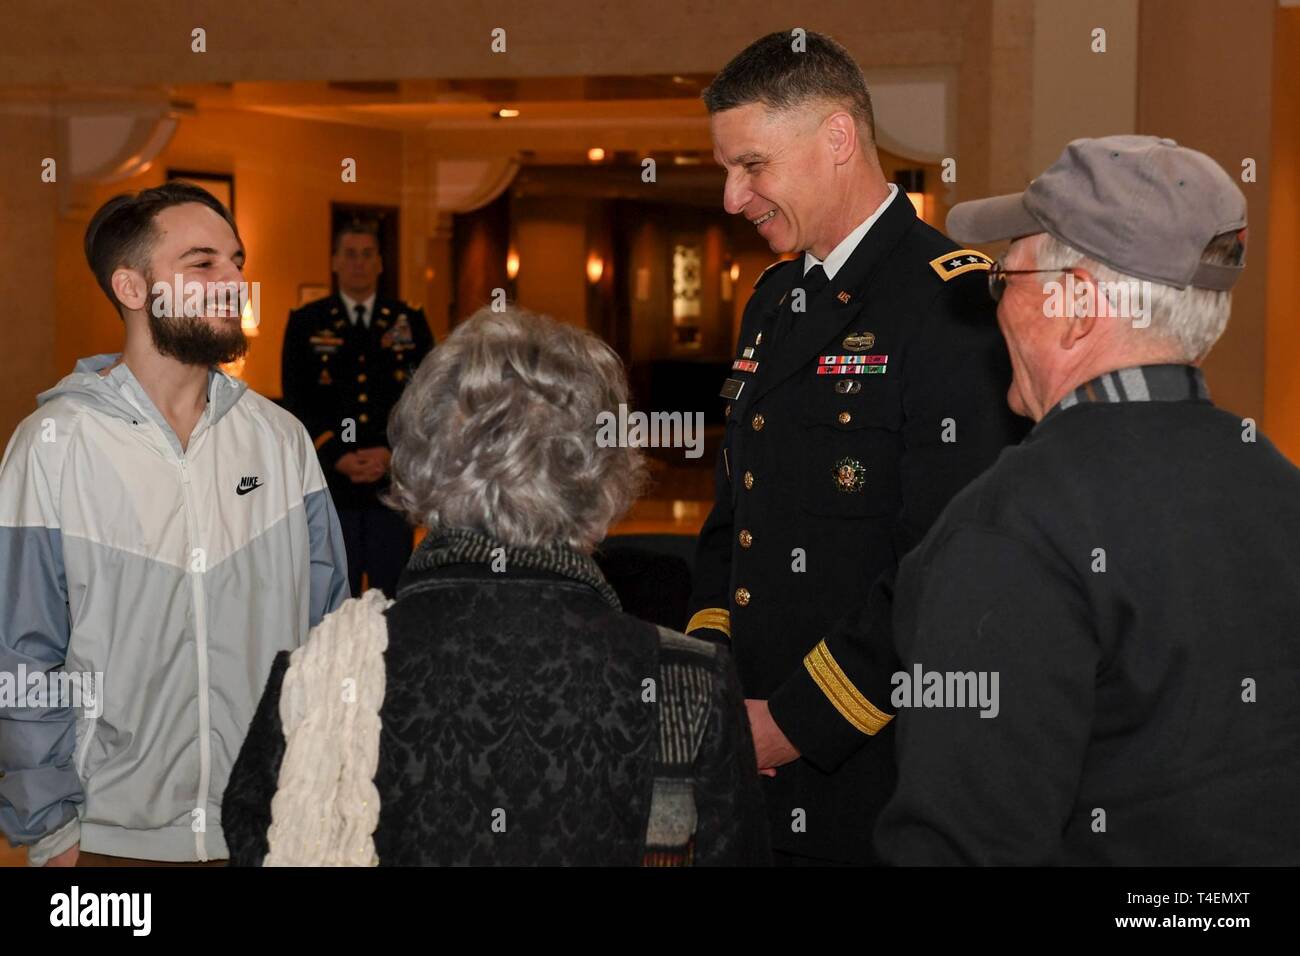 Vice Chief of Staff of the US Army Lt. Gen. Joseph M. Martin welcomes the arriving Medal of Honor family, Trevor Oliver, Jack and Elanine Atkins upon arrival to their hotel at Sheraton Pentagon City Hotel, Arlington, Va., March 24, 2019. Staff Sgt. Atkins will be posthumously awarded the Medal of Honor for actions while serving with Delta Company, 2nd Battalion, 14th Infantry Regiment, 2nd Bridgade Combat Team, 10th Mountain Division, in Abu Sarnak, Iraq, in support of Operation Iraqi Freedom, on June 1 2007. His extraordinary heroism in attempting to subdue a suicide bomber and shielding thre Stock Photo